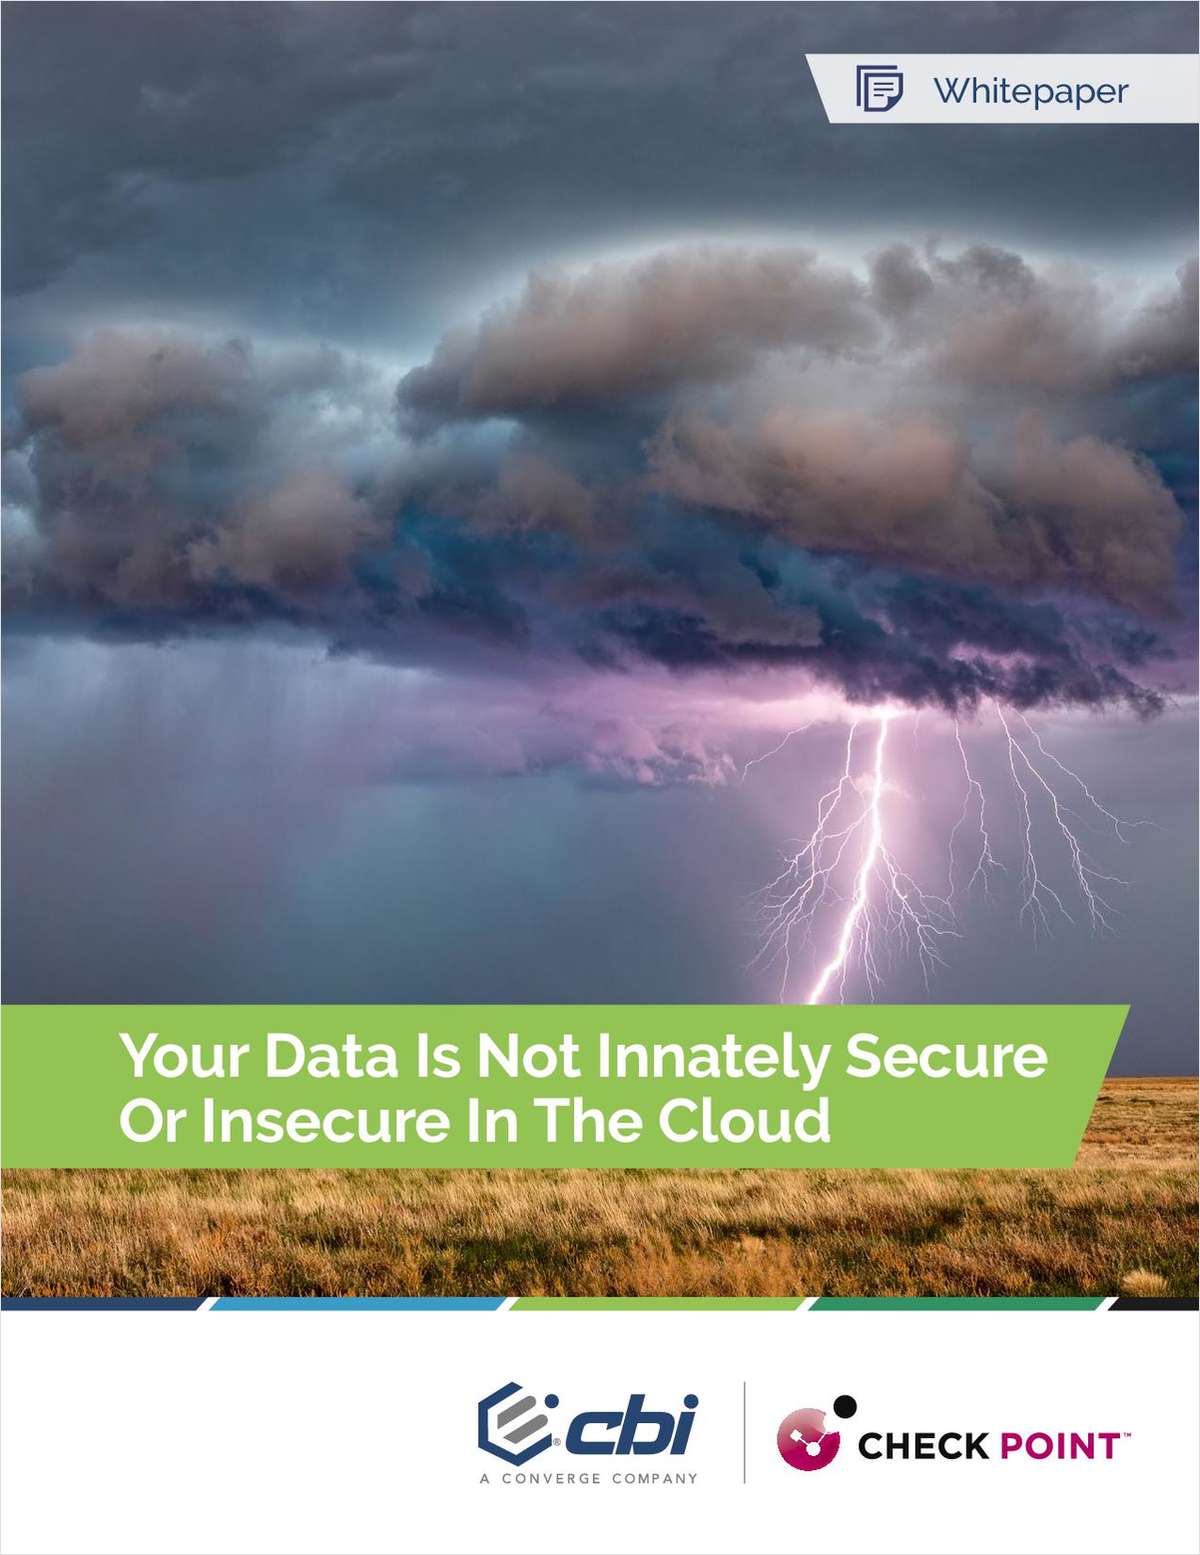 Your Data Is Not Innately Secure or Insecure in the Cloud